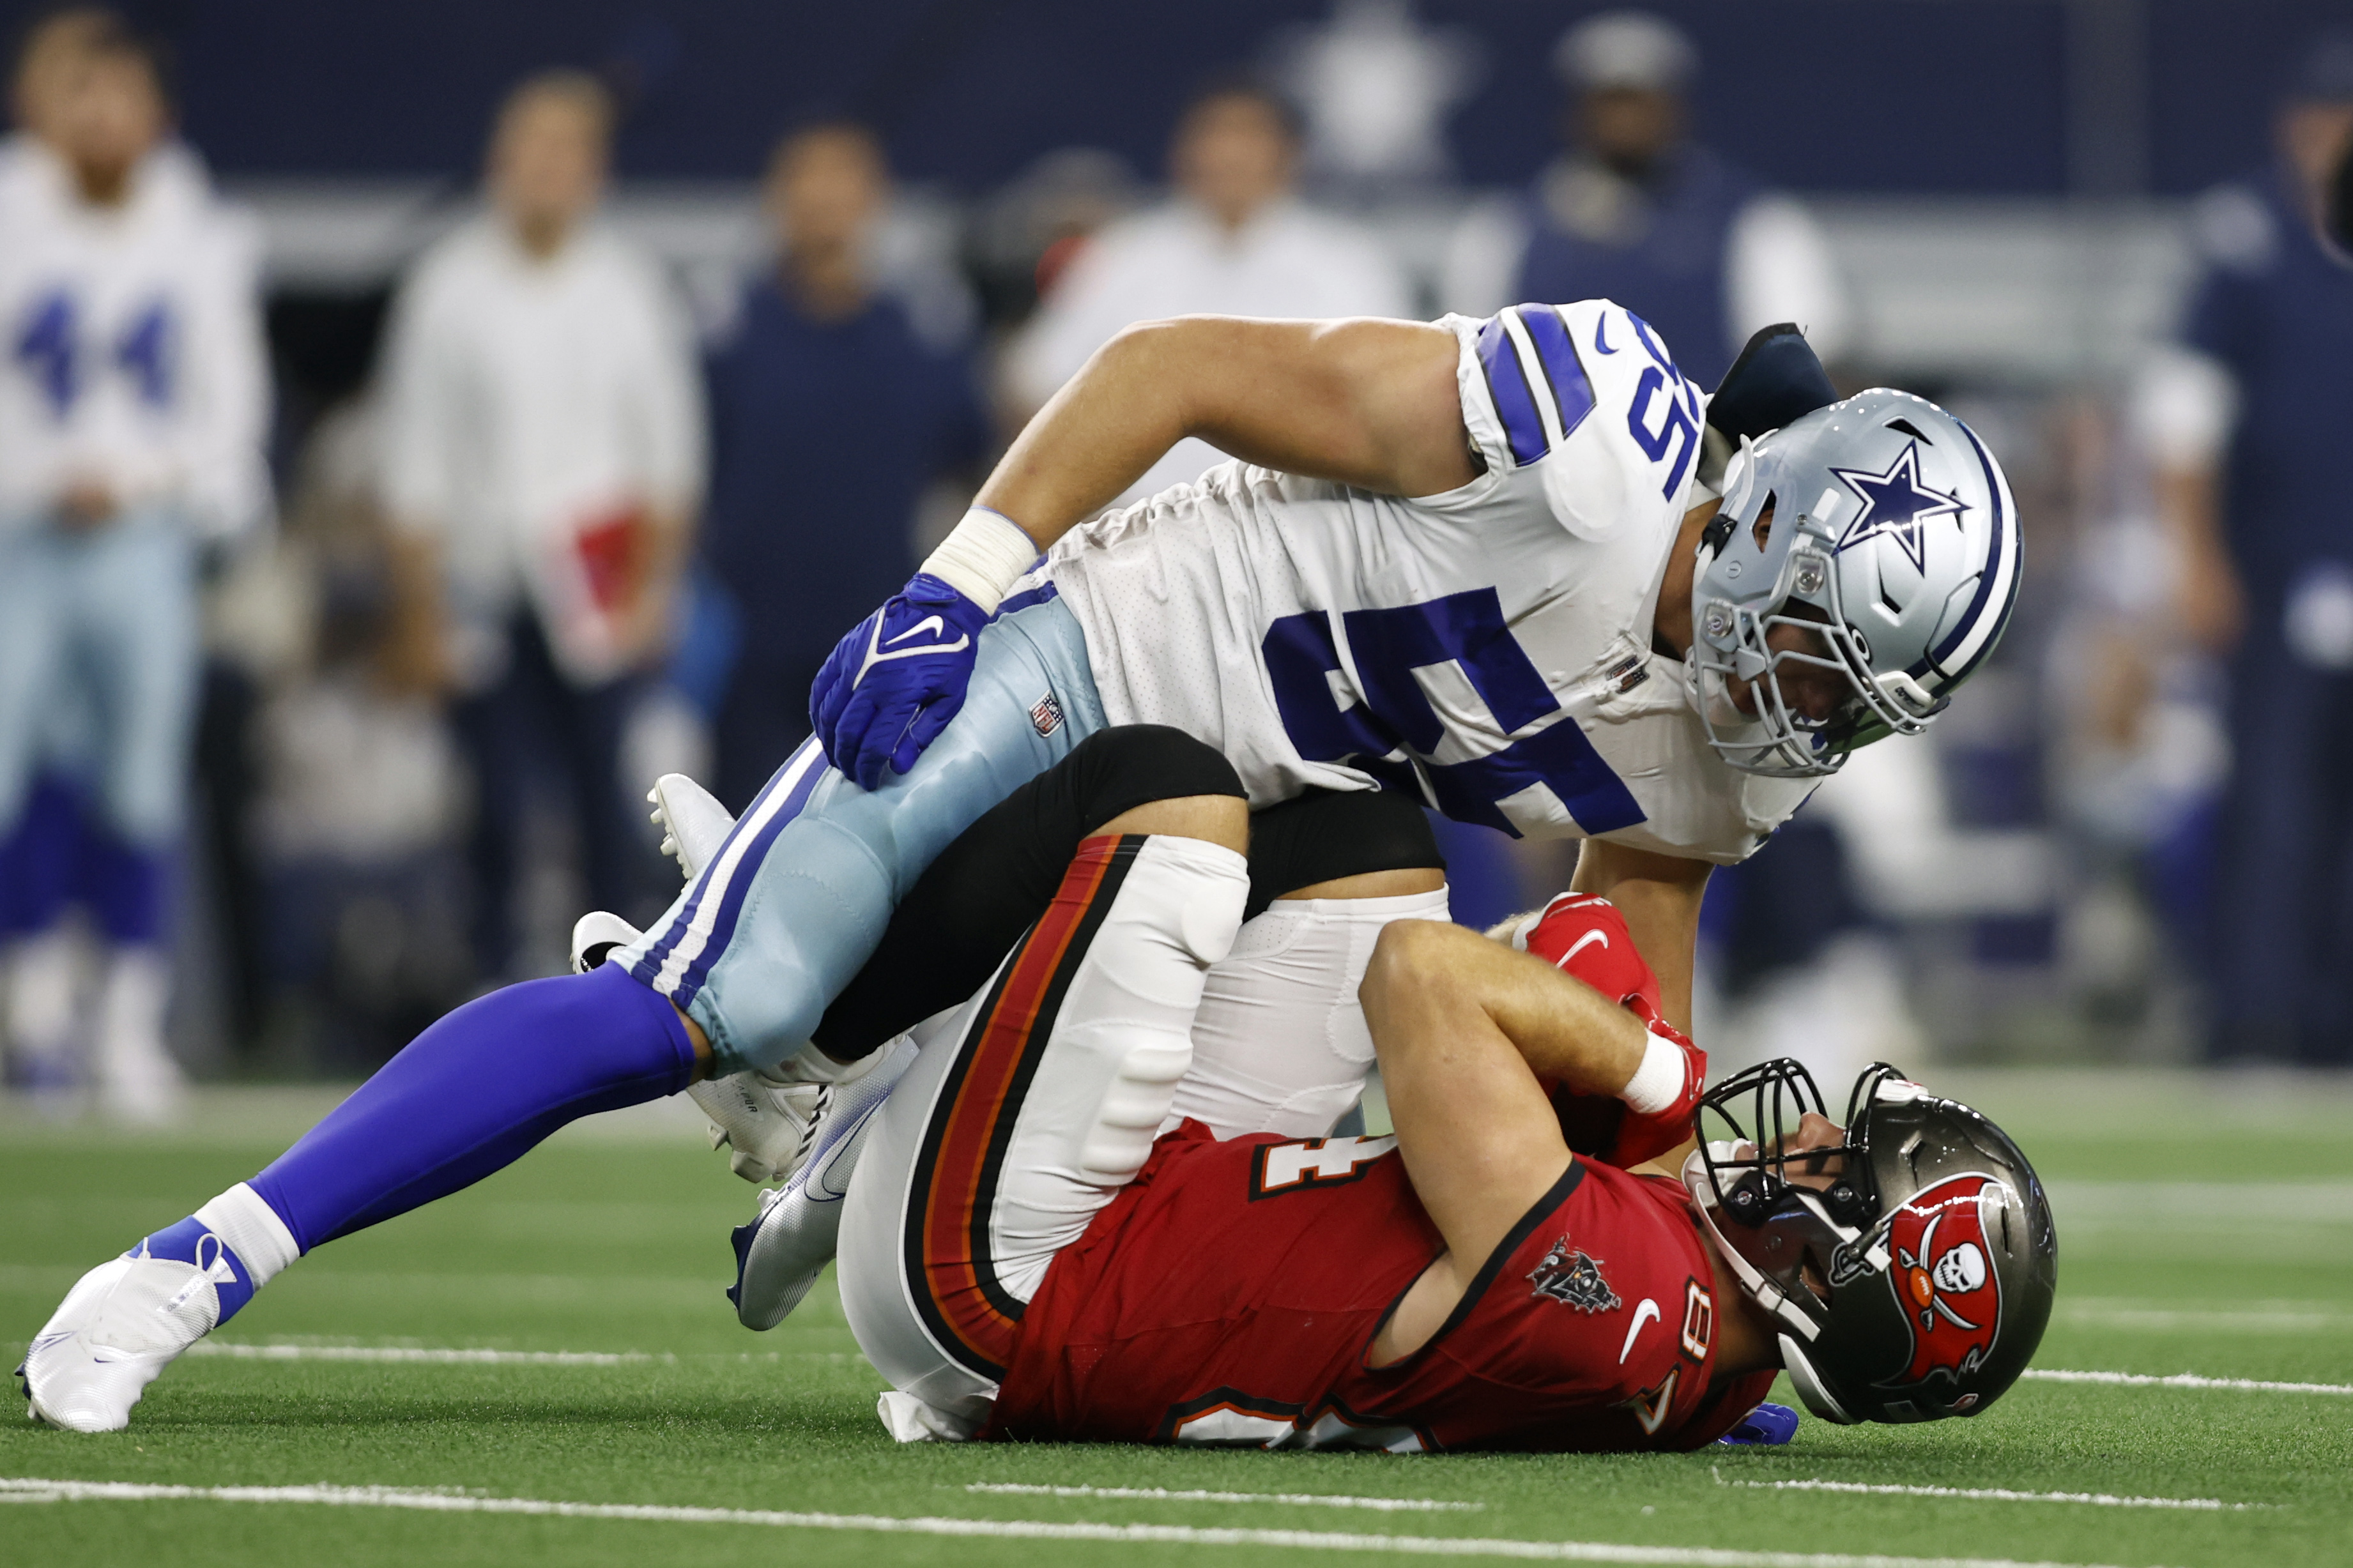 Vander Esch makes a tackle against the Tampa Bay Buccaneers.